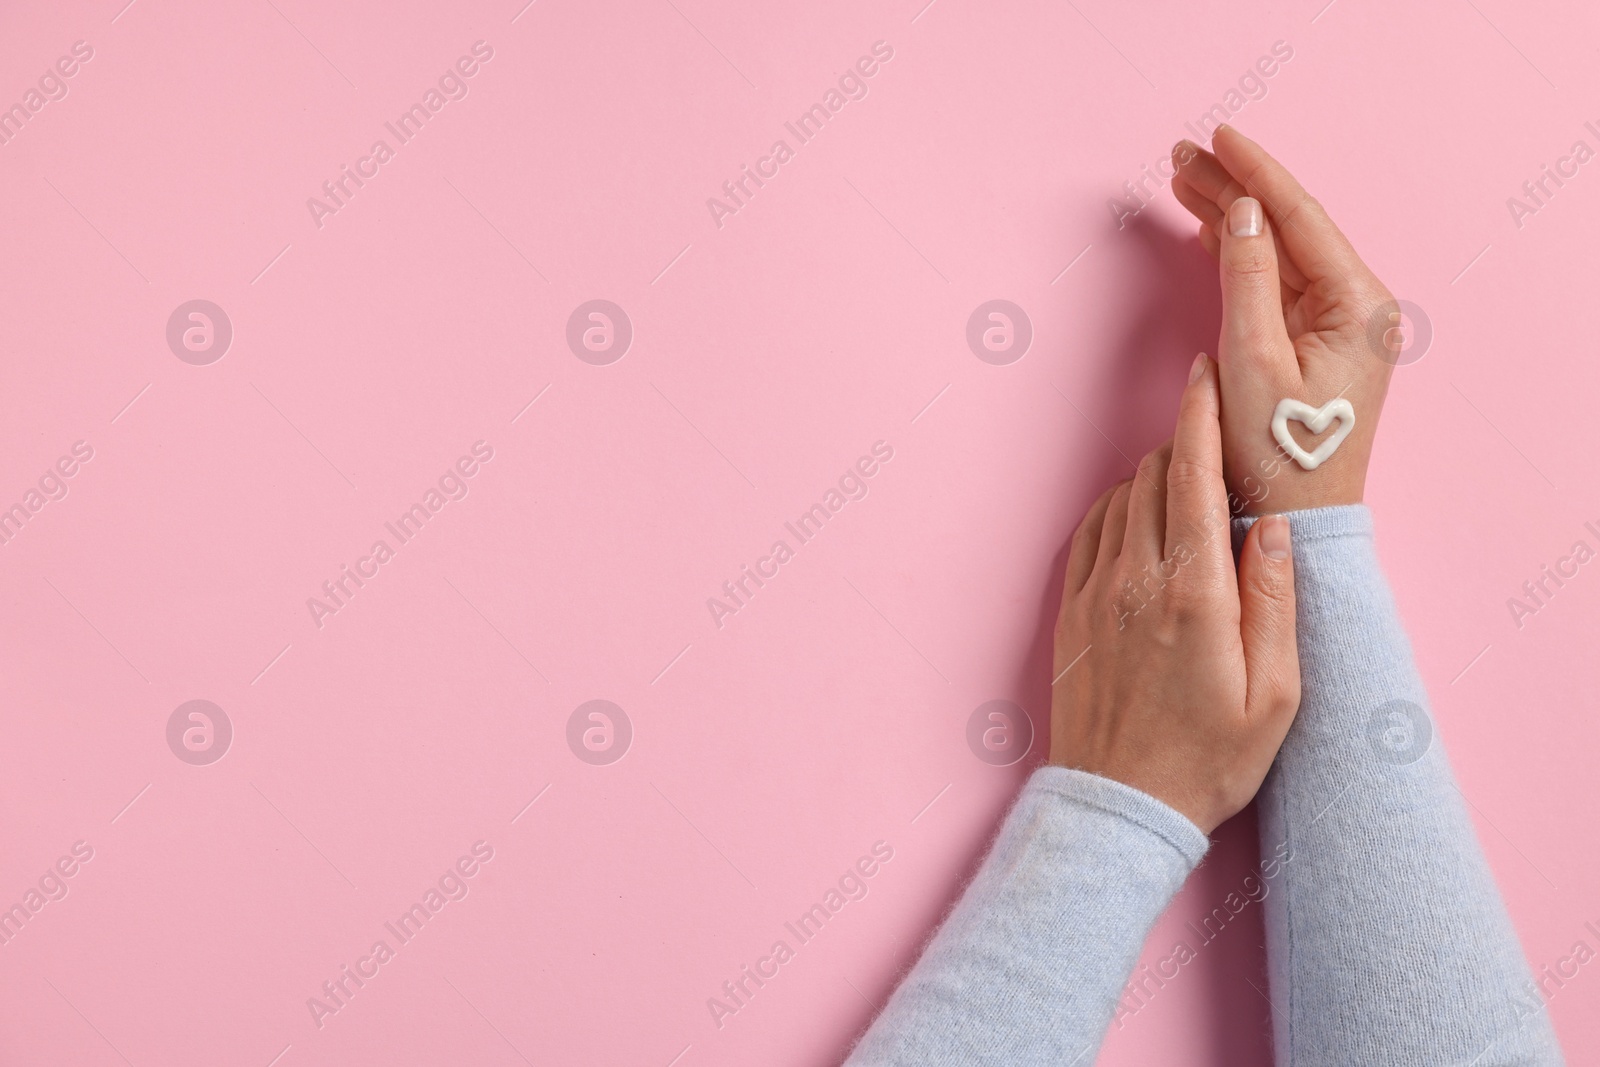 Photo of Woman with heart made of cosmetic cream on hand against pink background, top view. Space for text